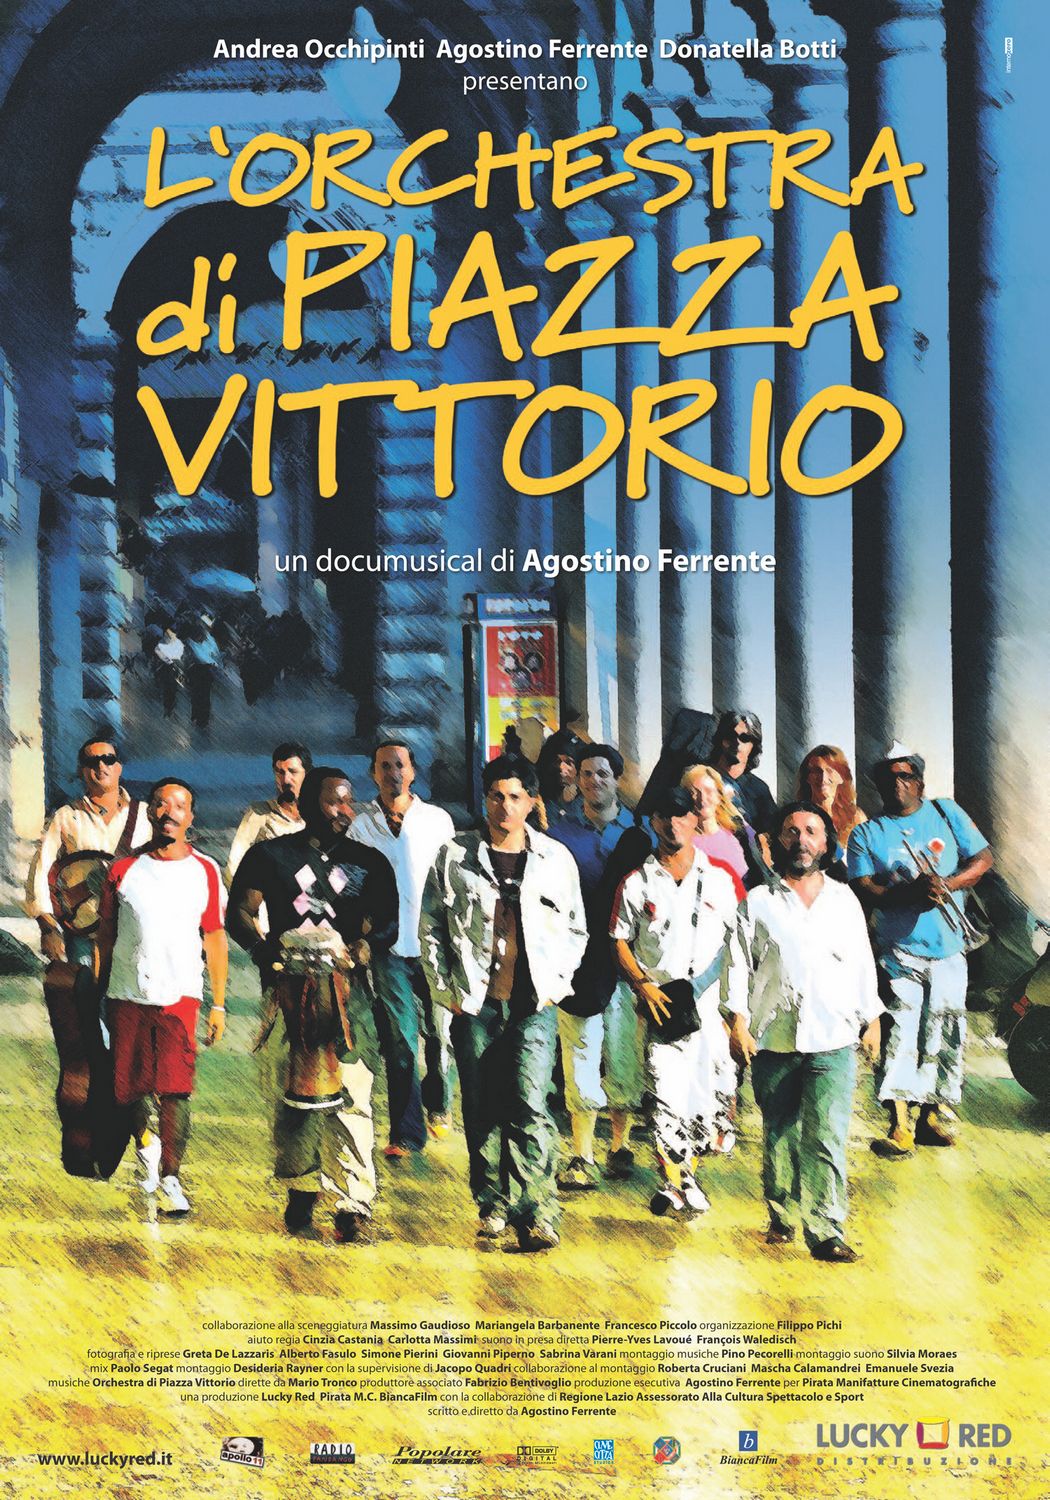 Extra Large Movie Poster Image for Orchestra di Piazza Vittorio, L' 